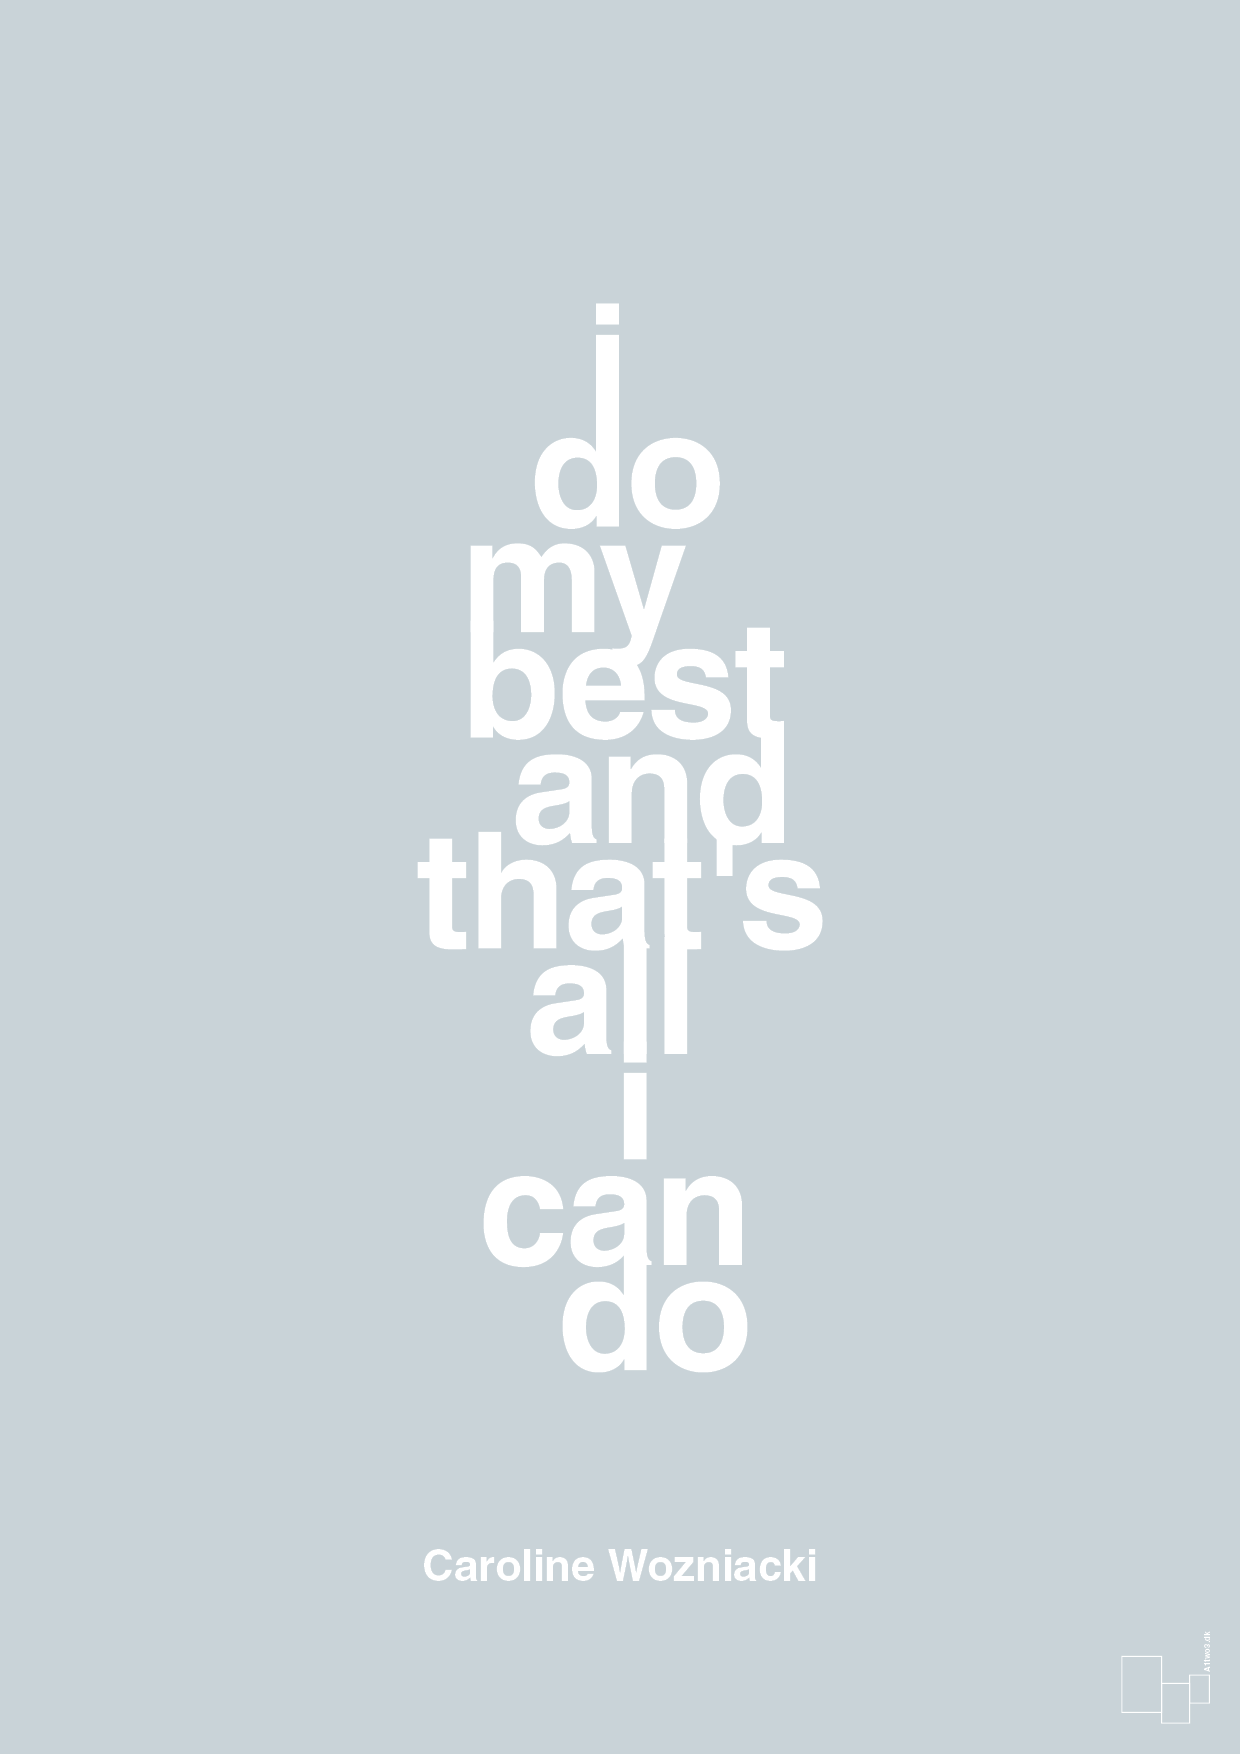 i do my best and that's all i can do - Plakat med Citater i Light Drizzle